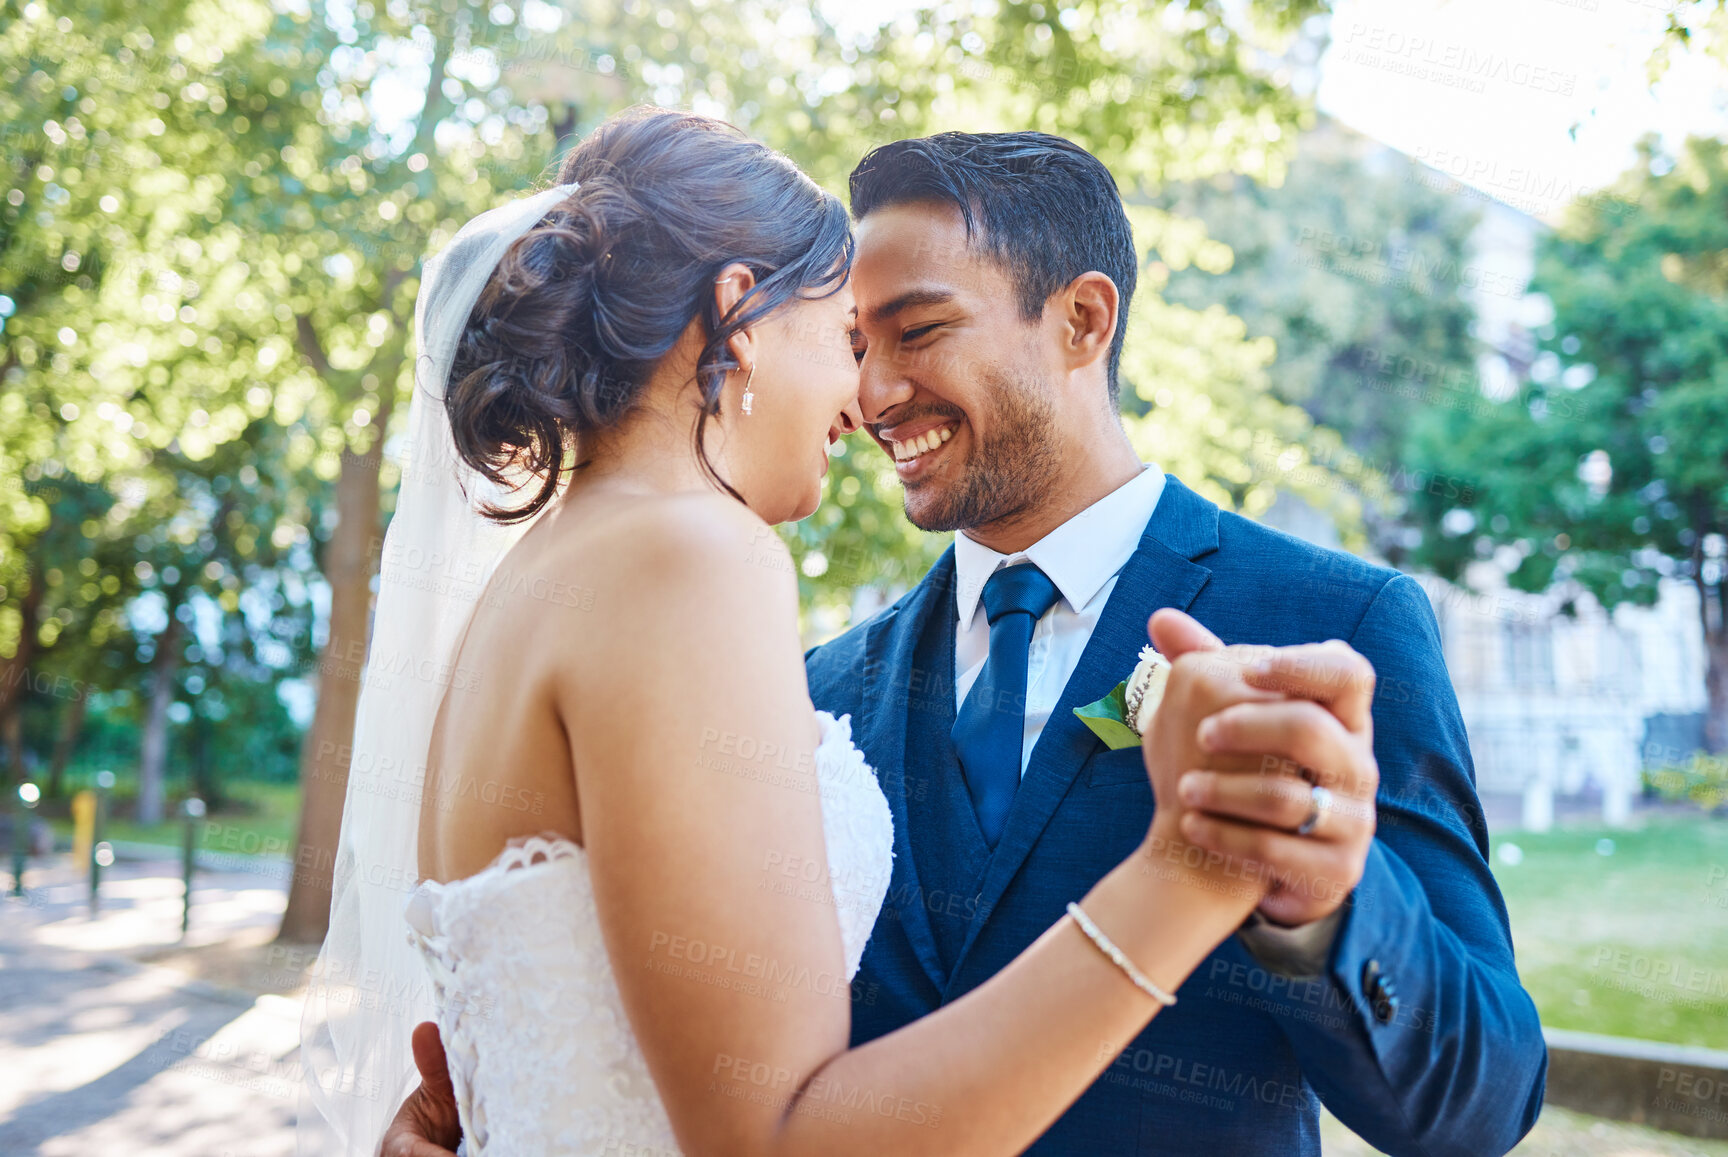 Buy stock photo Newlywed couple dancing outside. Mixed race bride and groom enjoying romantic moments on their wedding day. Happy young romantic couple sharing a dance in nature